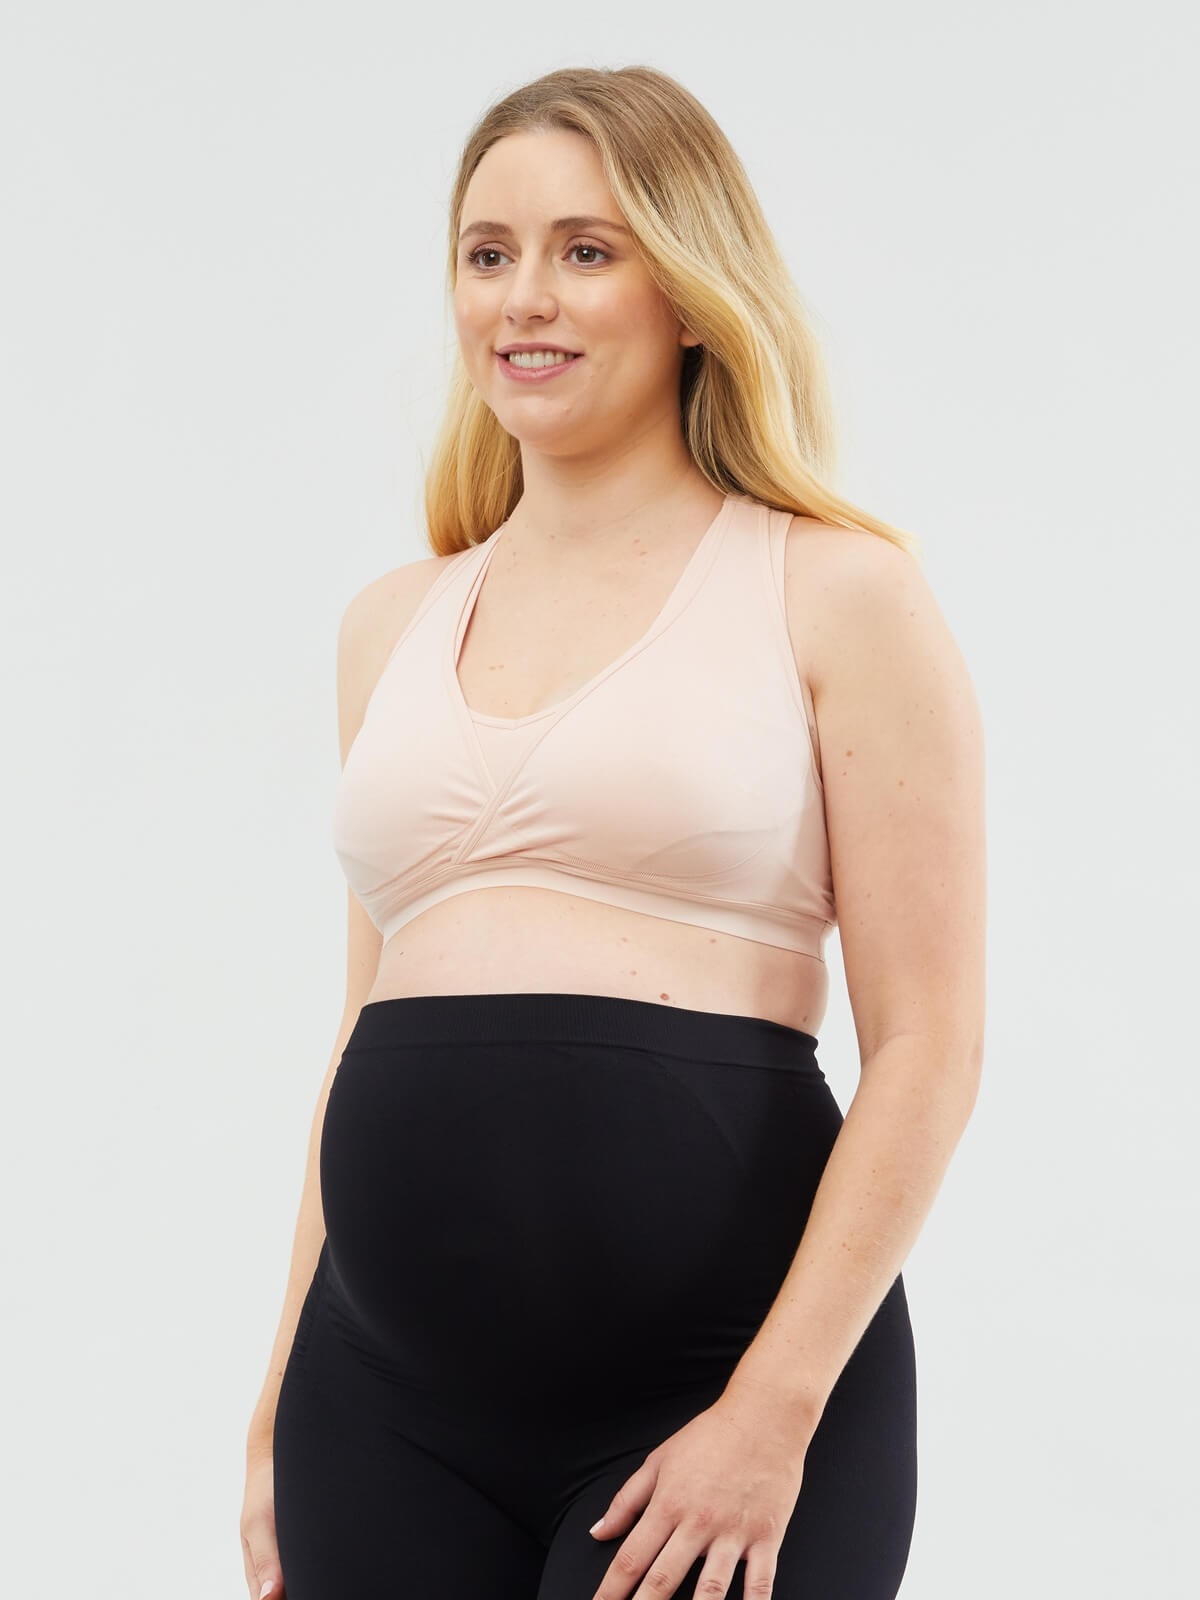 Buy Truly Hands Free Pumping Bra - Nurturally - Fits 36A to 46D,  Comfortable, Adjustable, Works with Lansinoh, Spectra, Evenflo Online at  desertcartOMAN